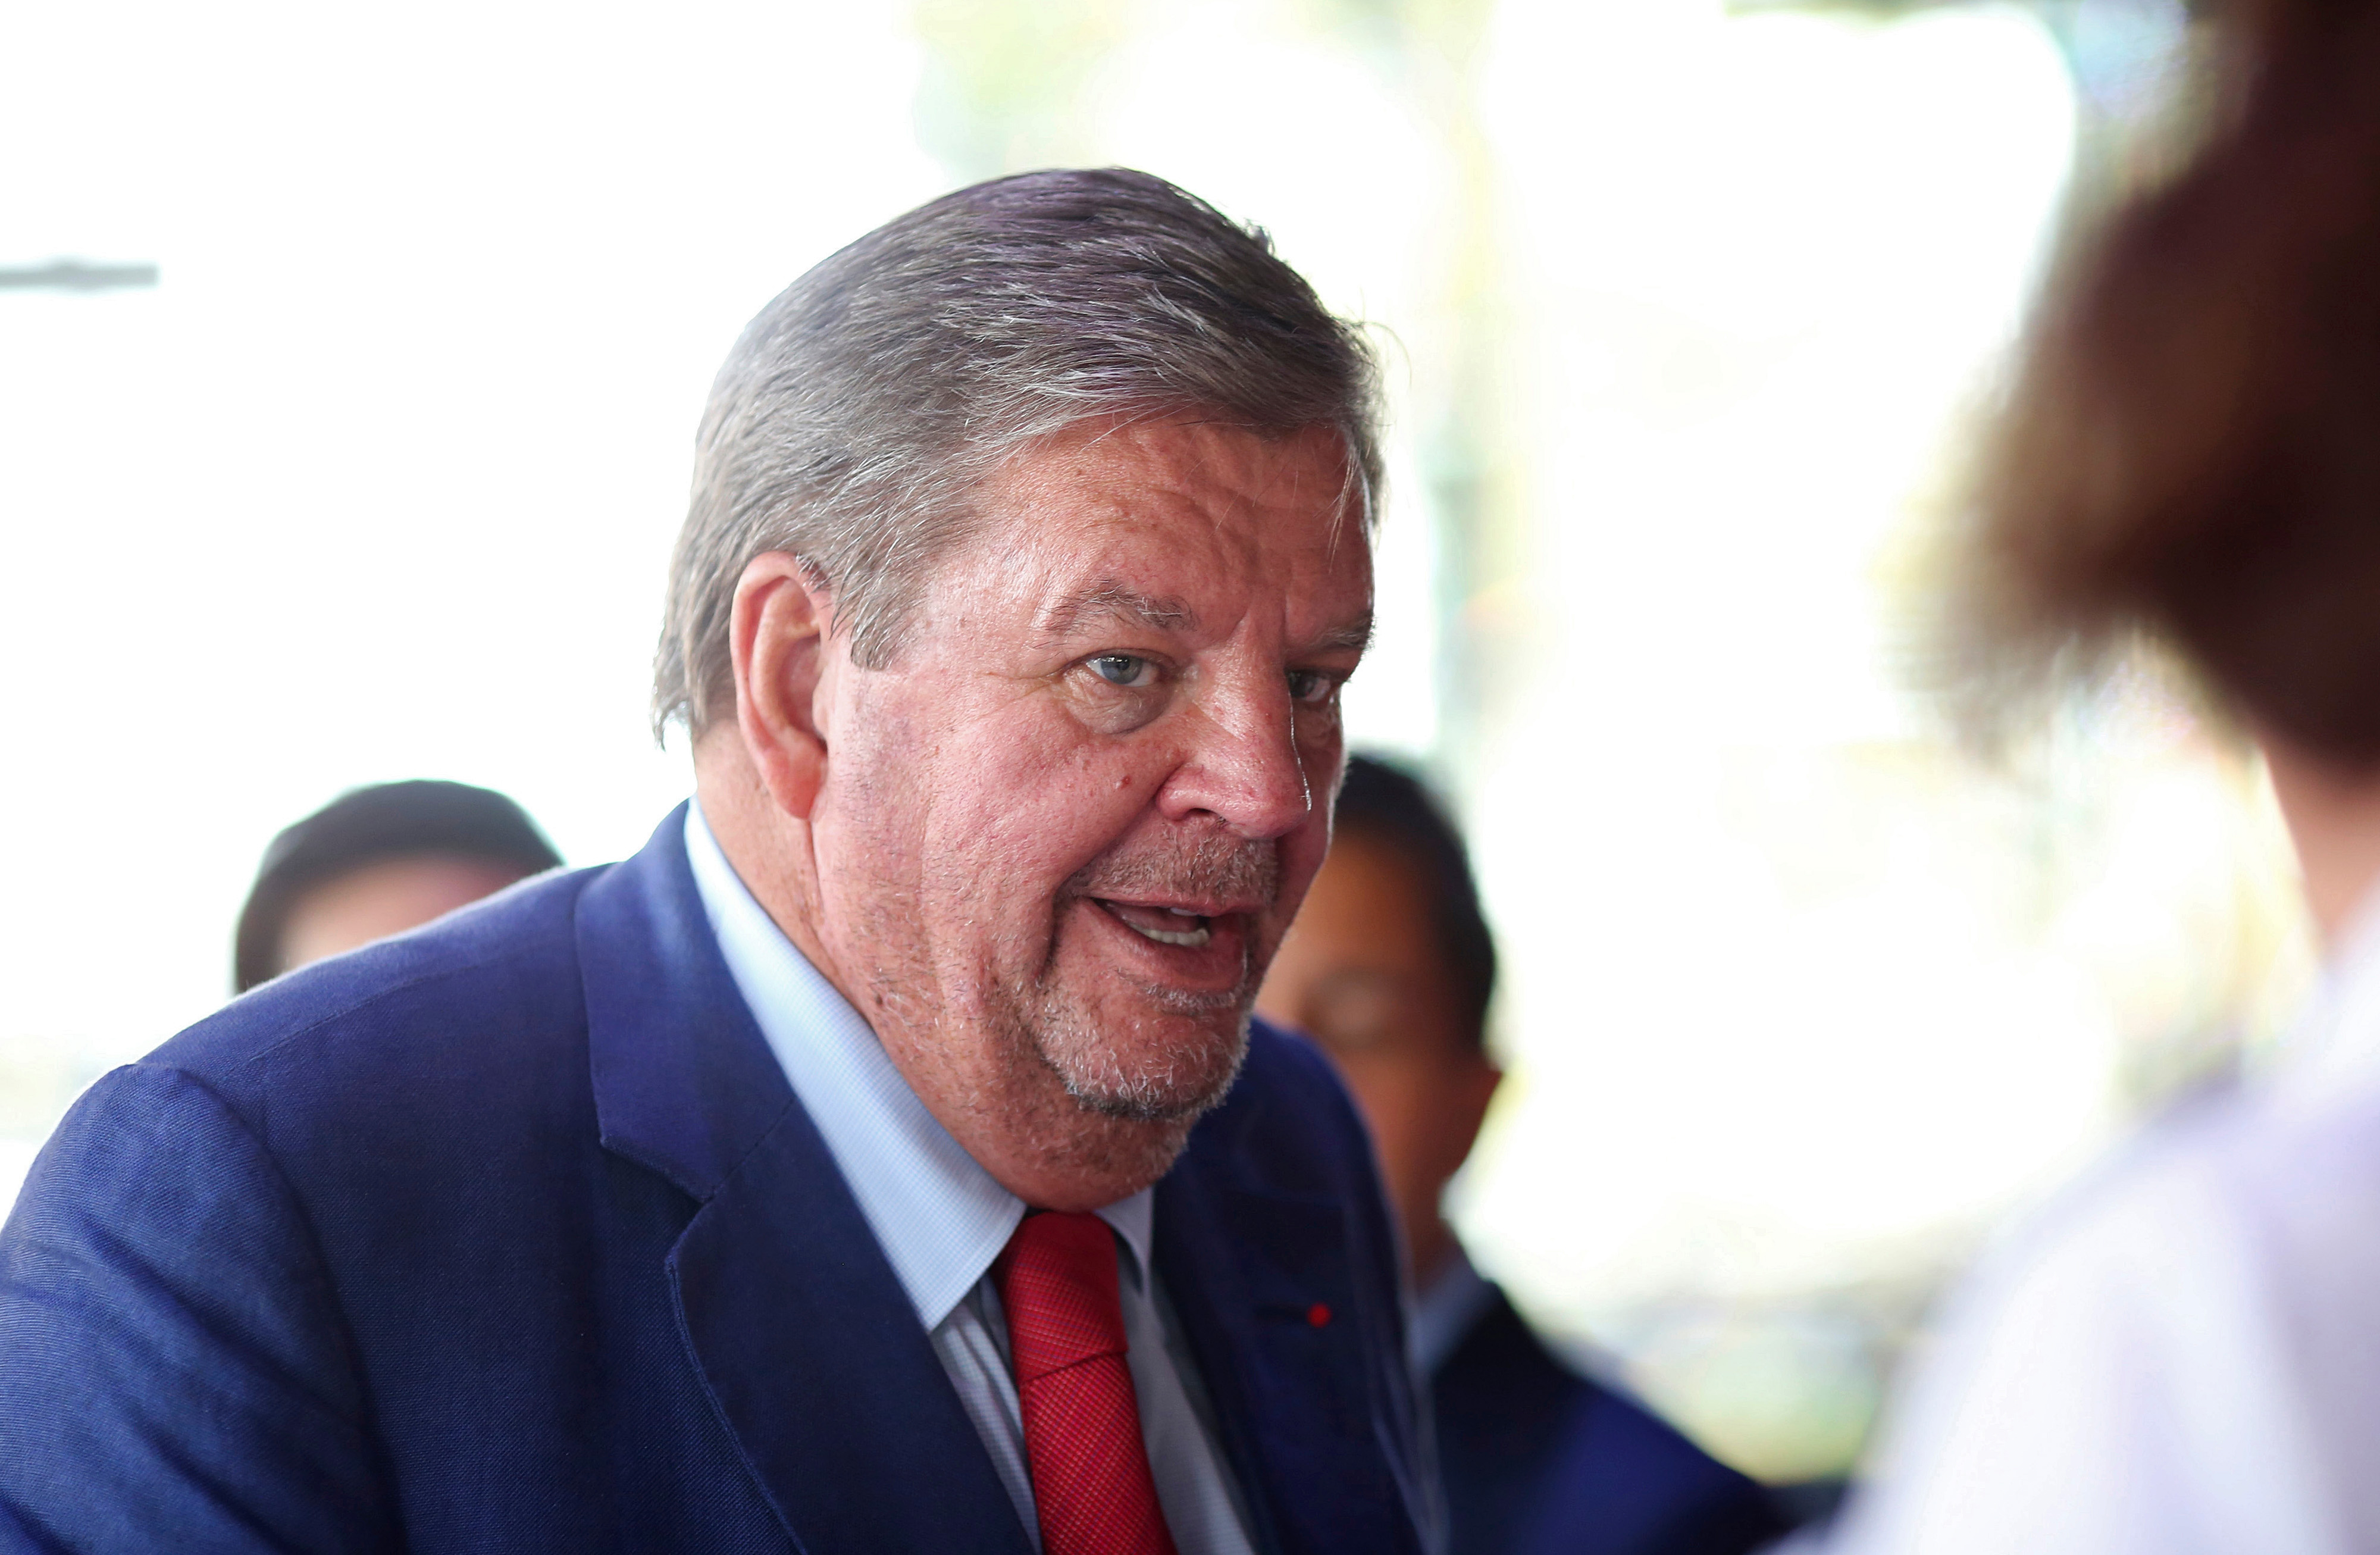 Johann Rupert, founder and chairman of Cie. Financiere Richemont SA, speaks with delegates during the Business of Luxury summit in Monaco, on Monday, June 8, 2015. The Monaco Business of Luxury summit runs from June 8-9. Photographer: Chris Ratcliffe/Bloomberg *** Local Caption *** Johann Rupert